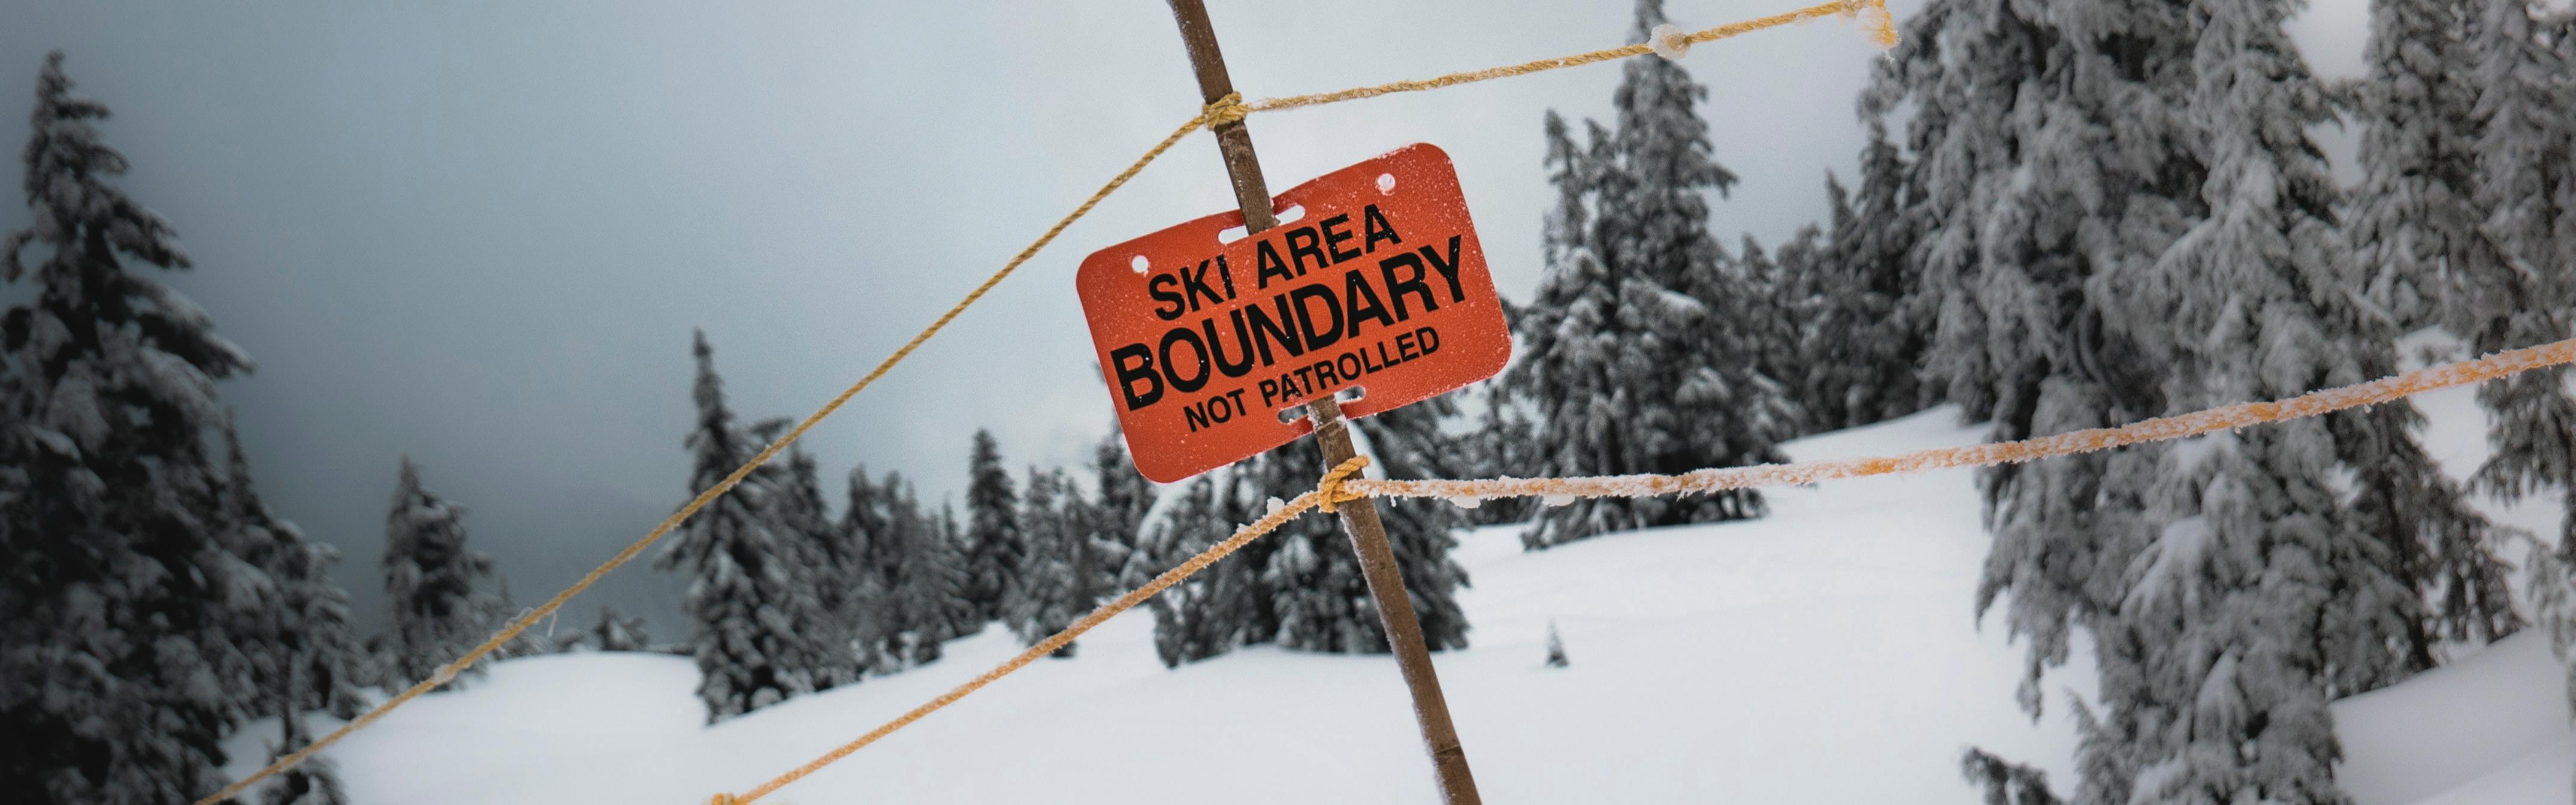 An orange sign reads "Ski Area Boundary. Not Patrolled." with signs roping off the boundary.